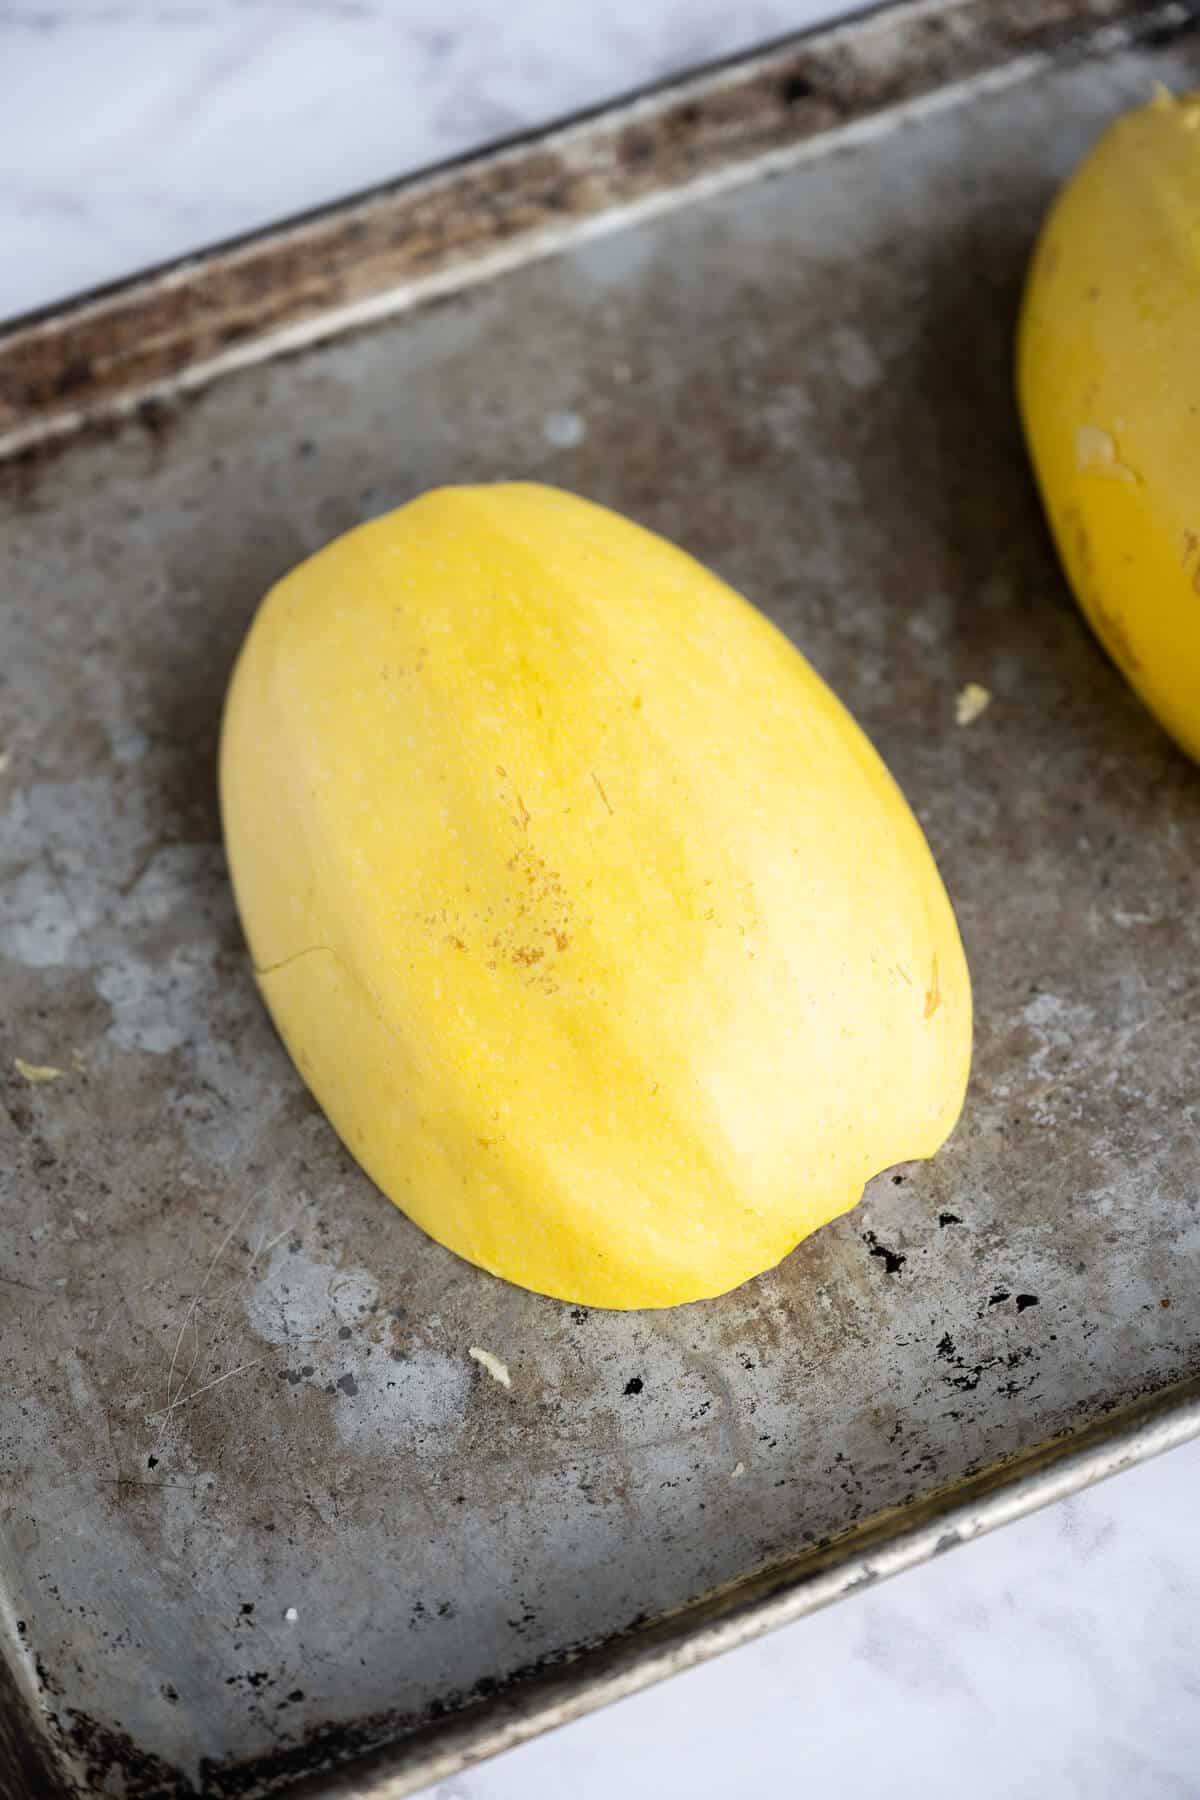 spaghetti squash sliced in half lengthwise cut side down on rimmed baking sheet.